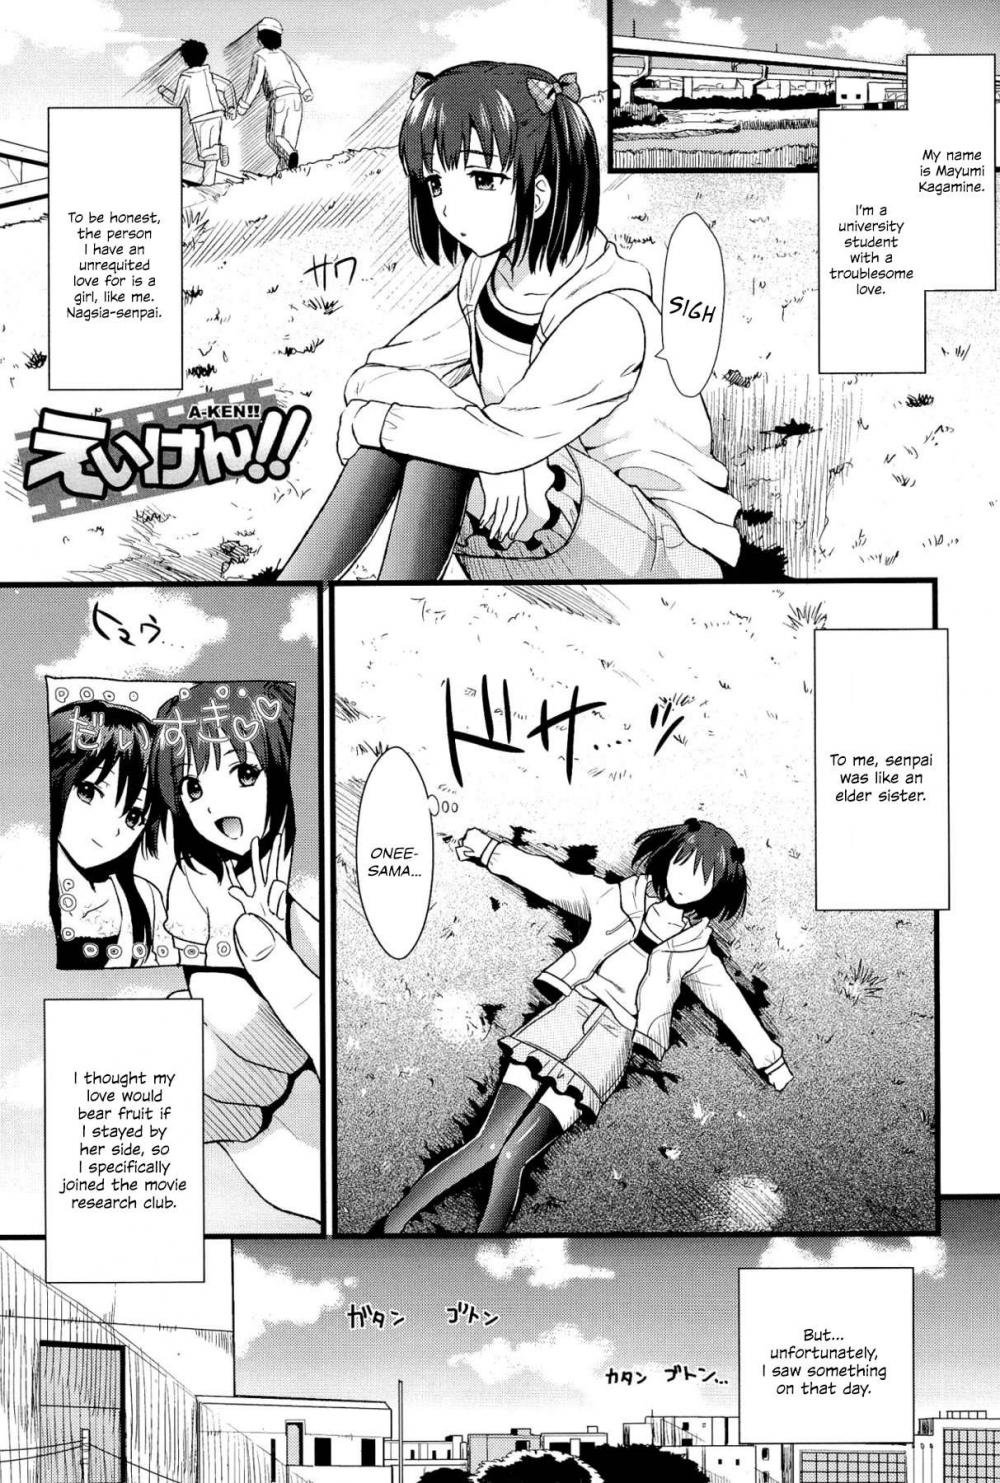 Hentai Manga Comic-His and Hers Master-Servant Relationship-Chapter 3-1